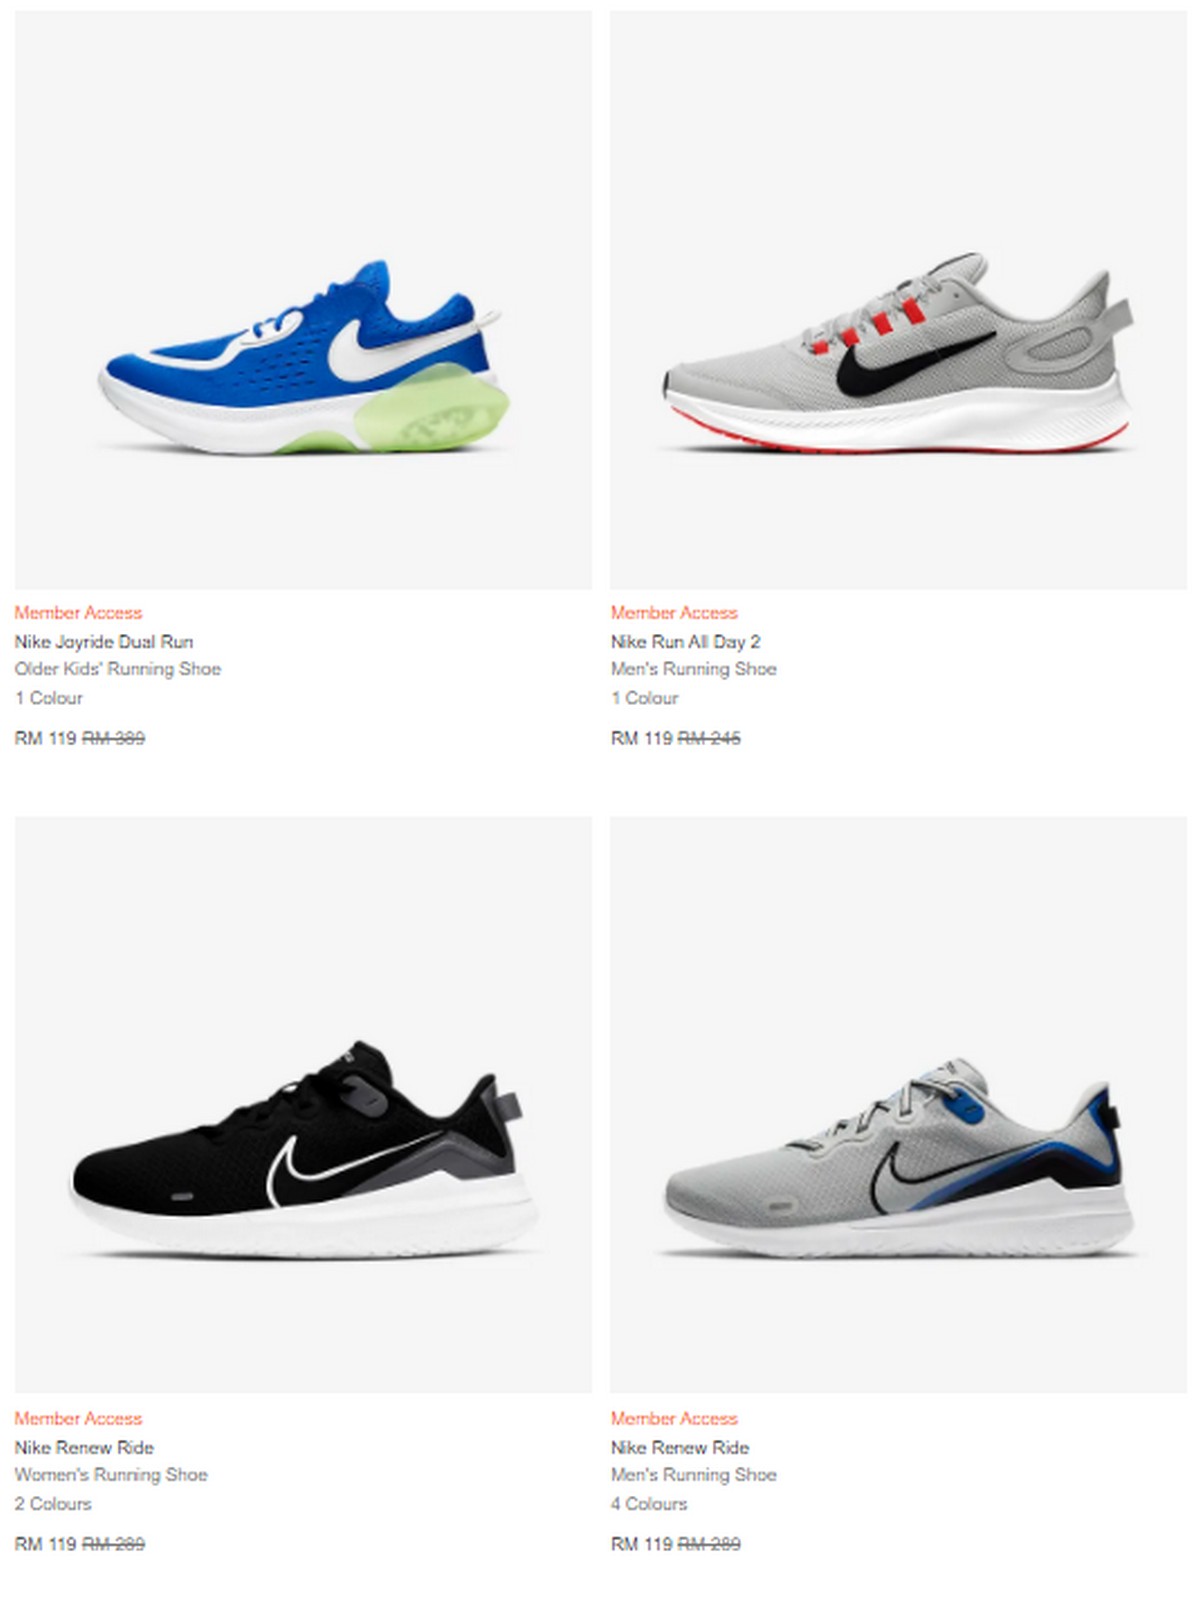 nike-11-11-preview-offer-new-2 - LifeStyle 